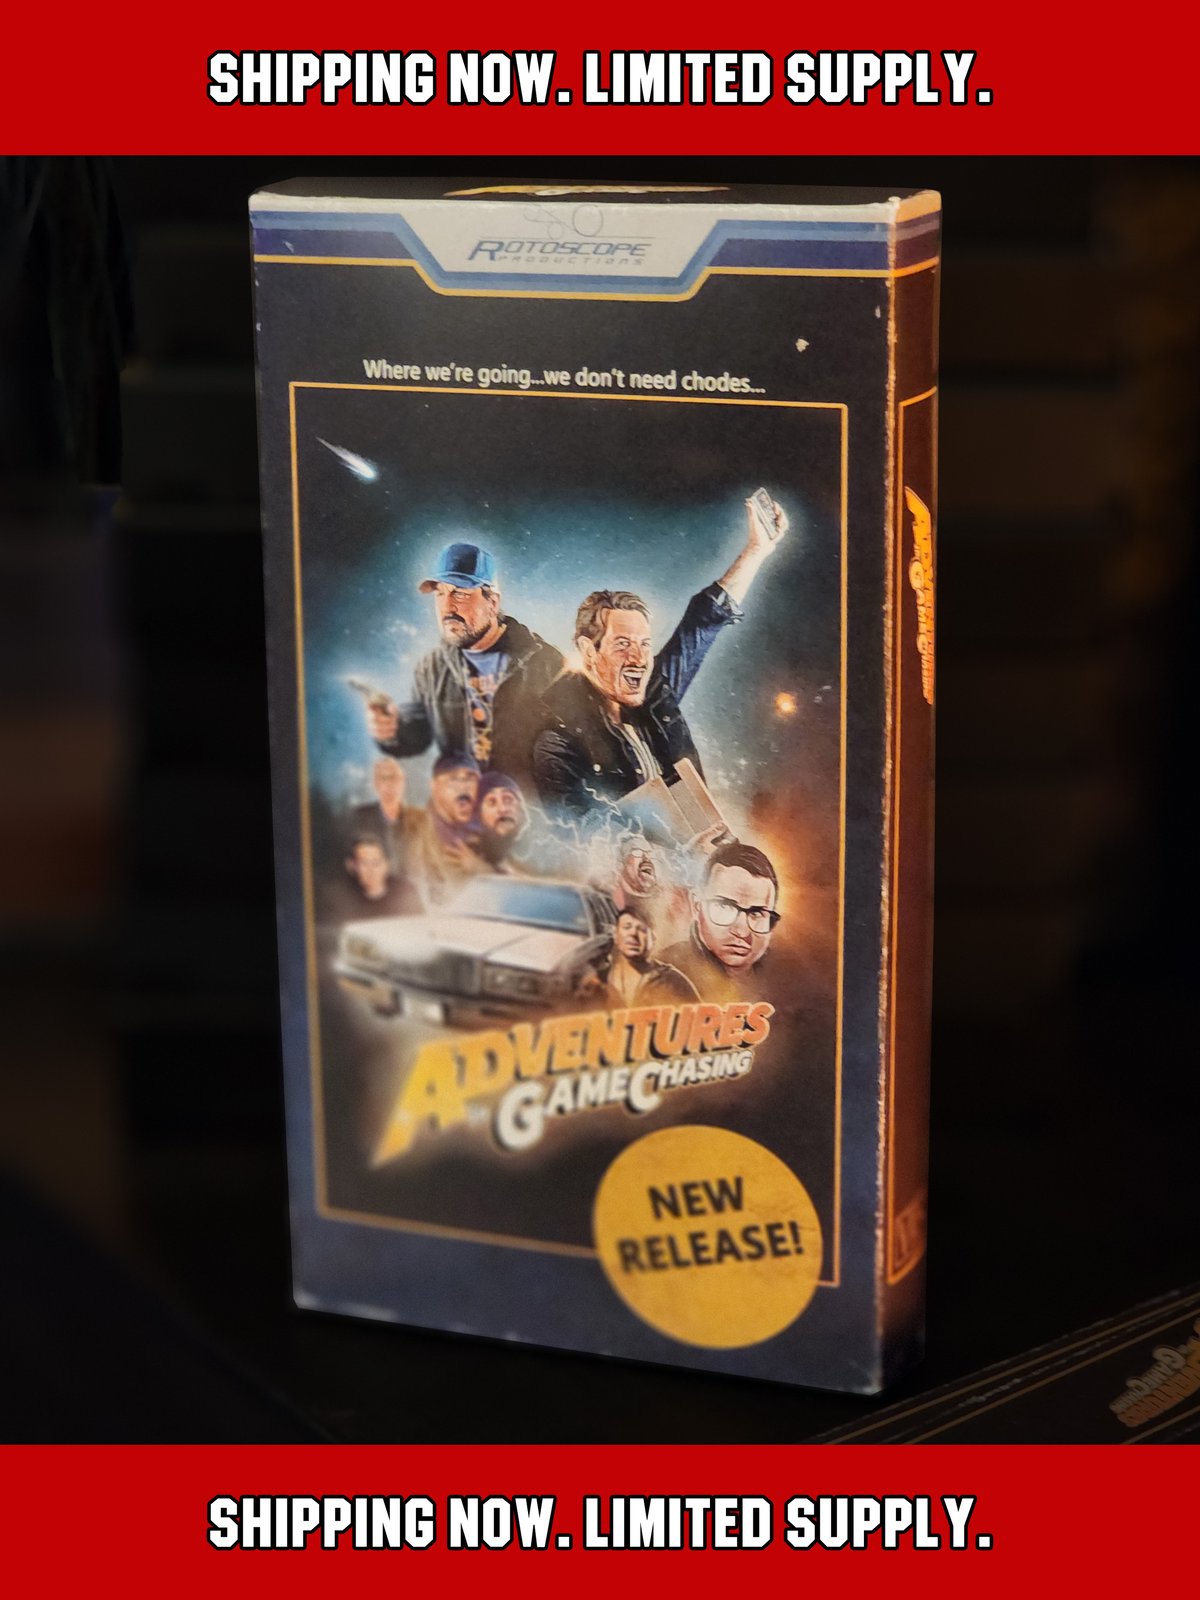 Adventures In Game Chasing Limited Edition VHS